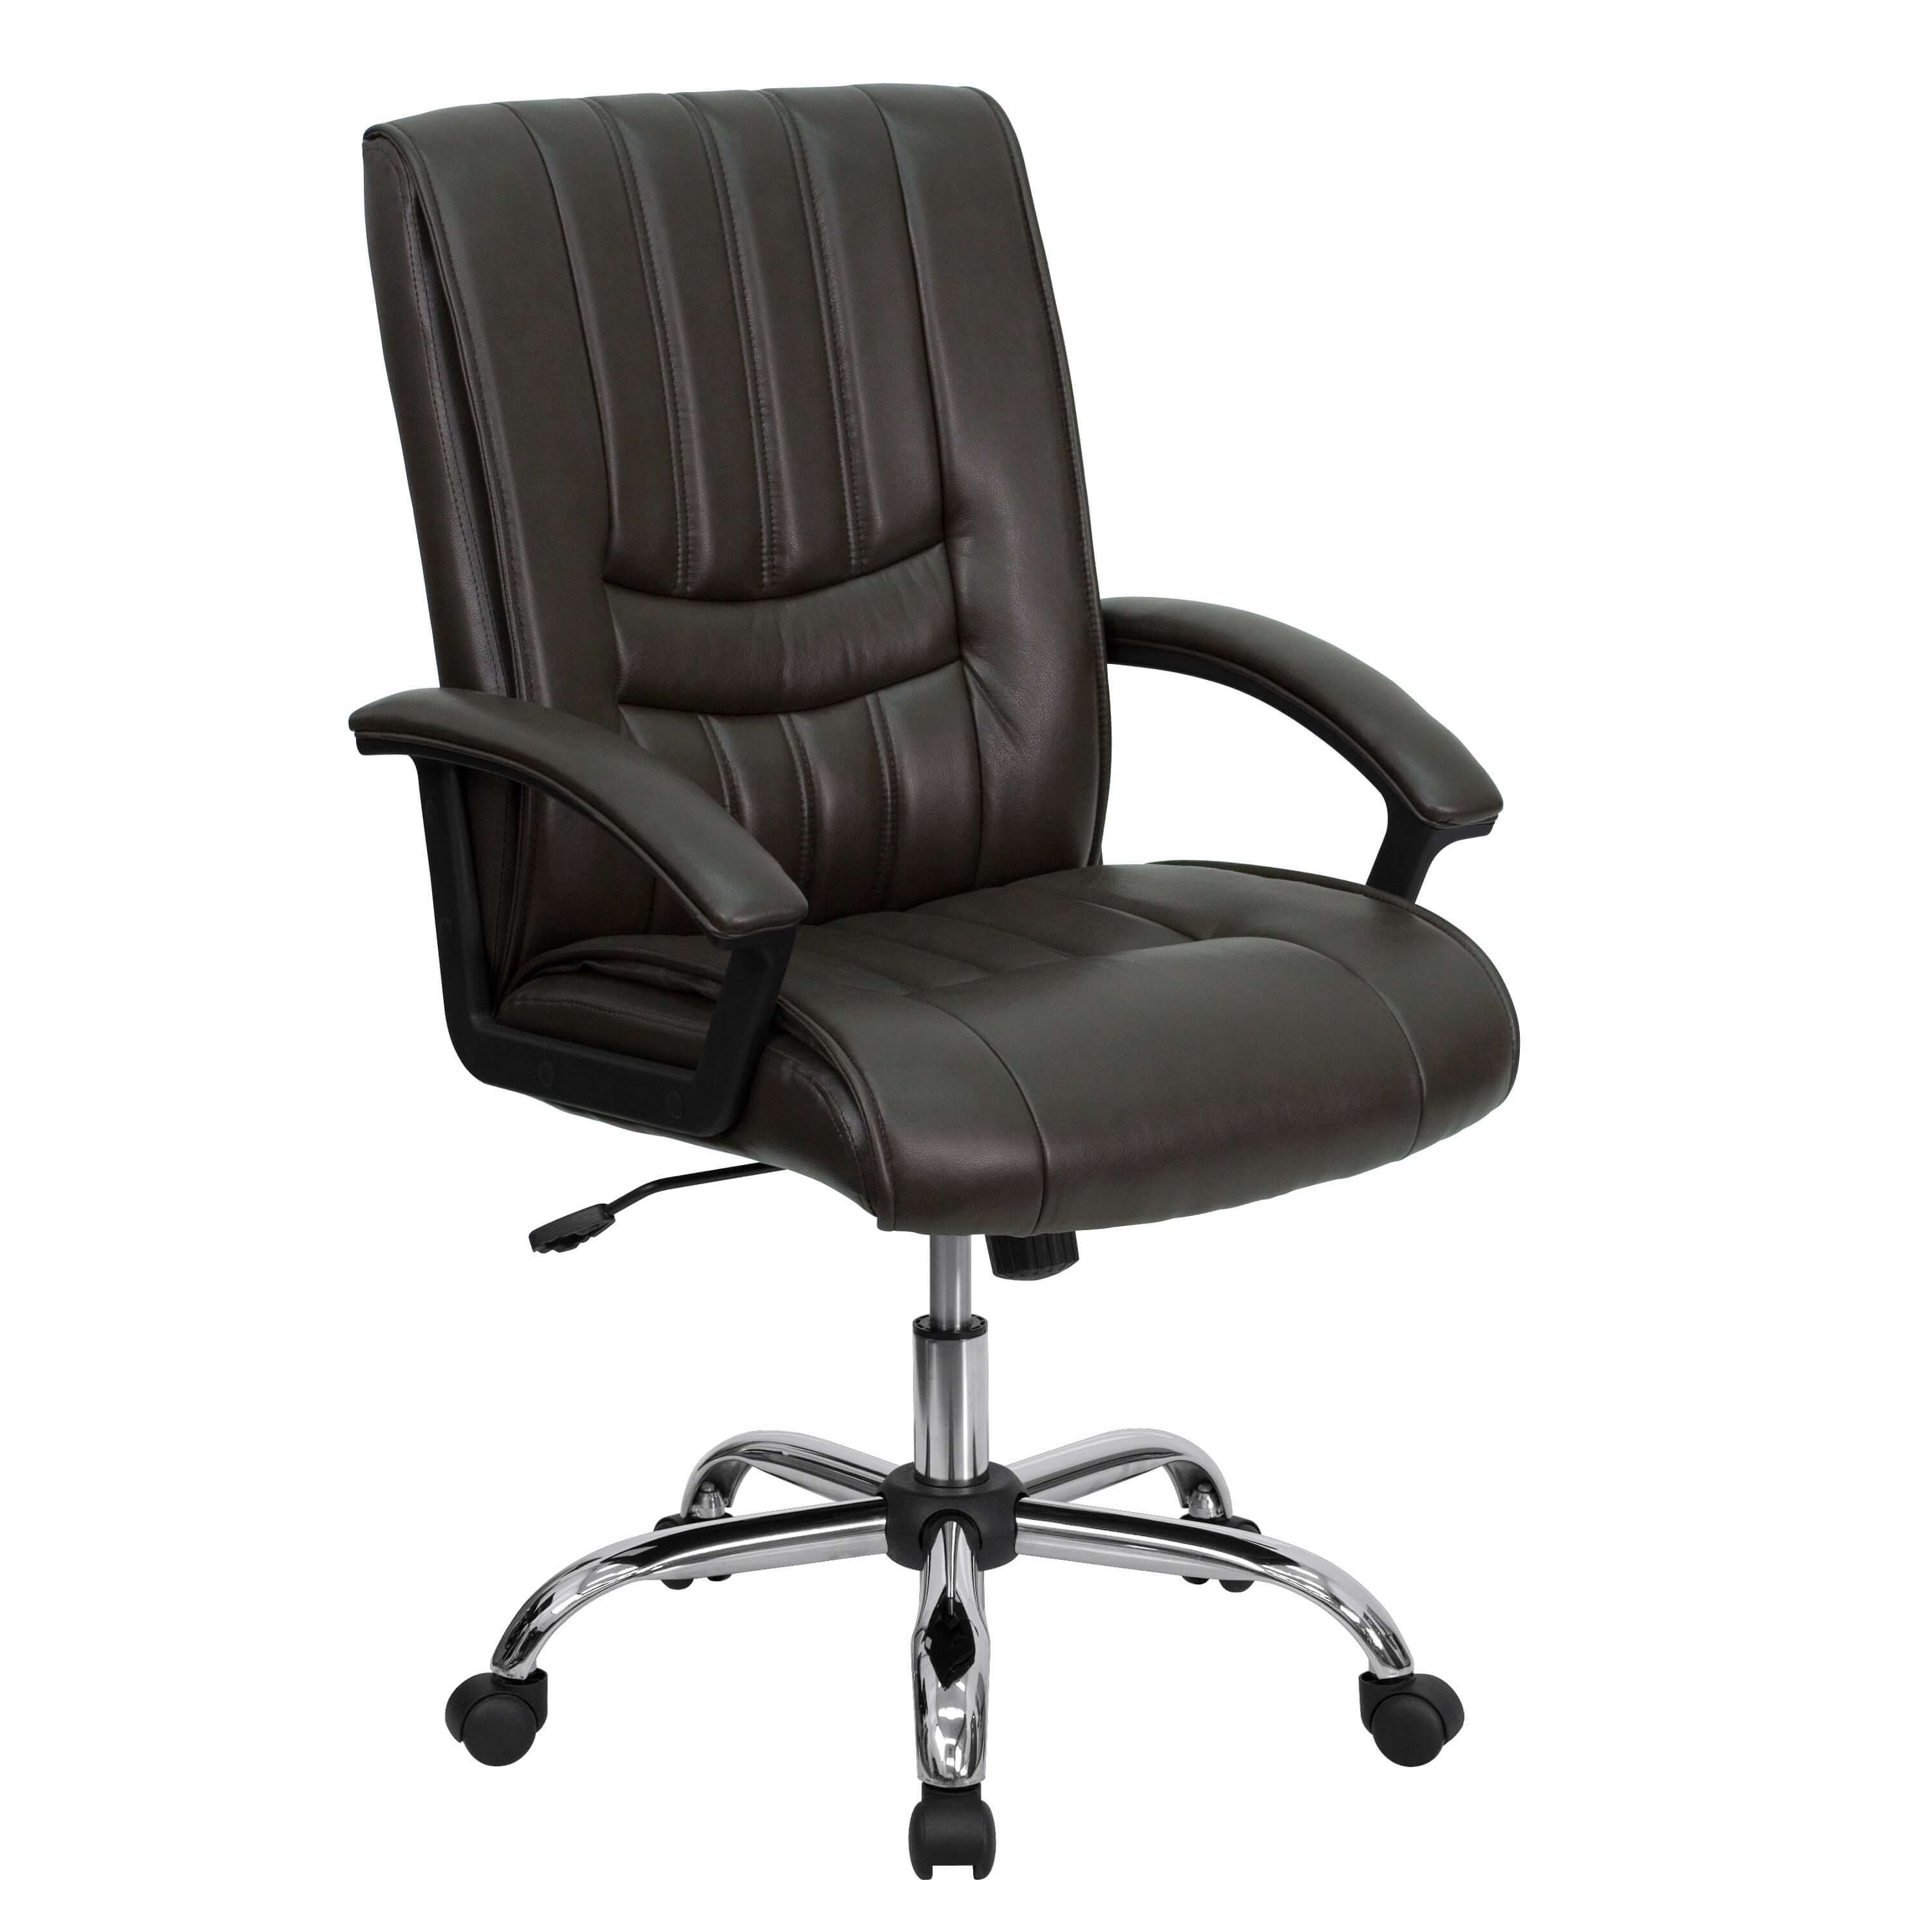 cool-office-chairs-executive-leather-chair.jpg